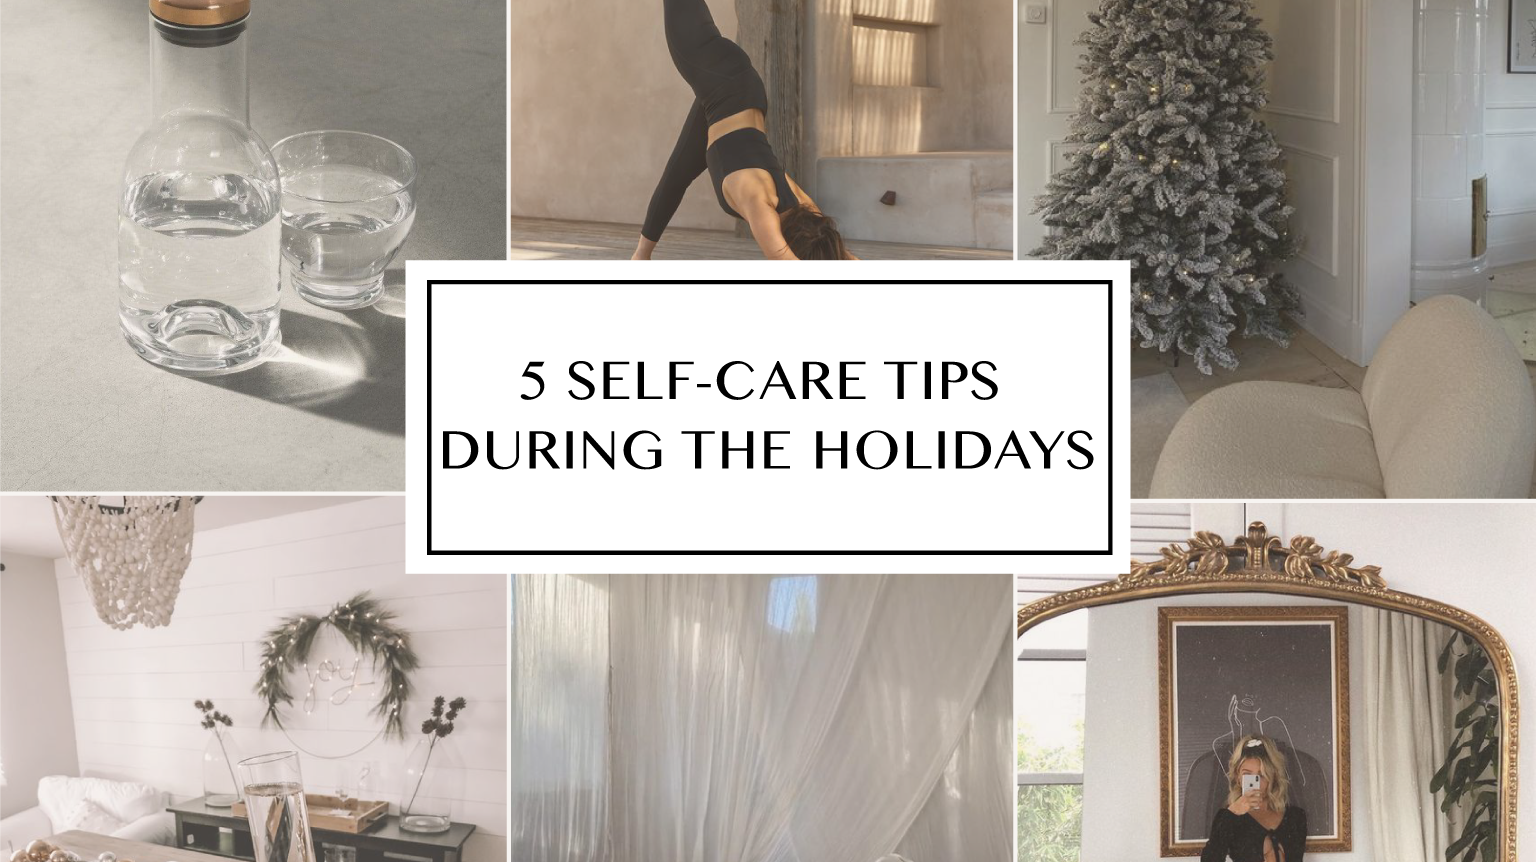 5 Self-Care Tips During the Holidays